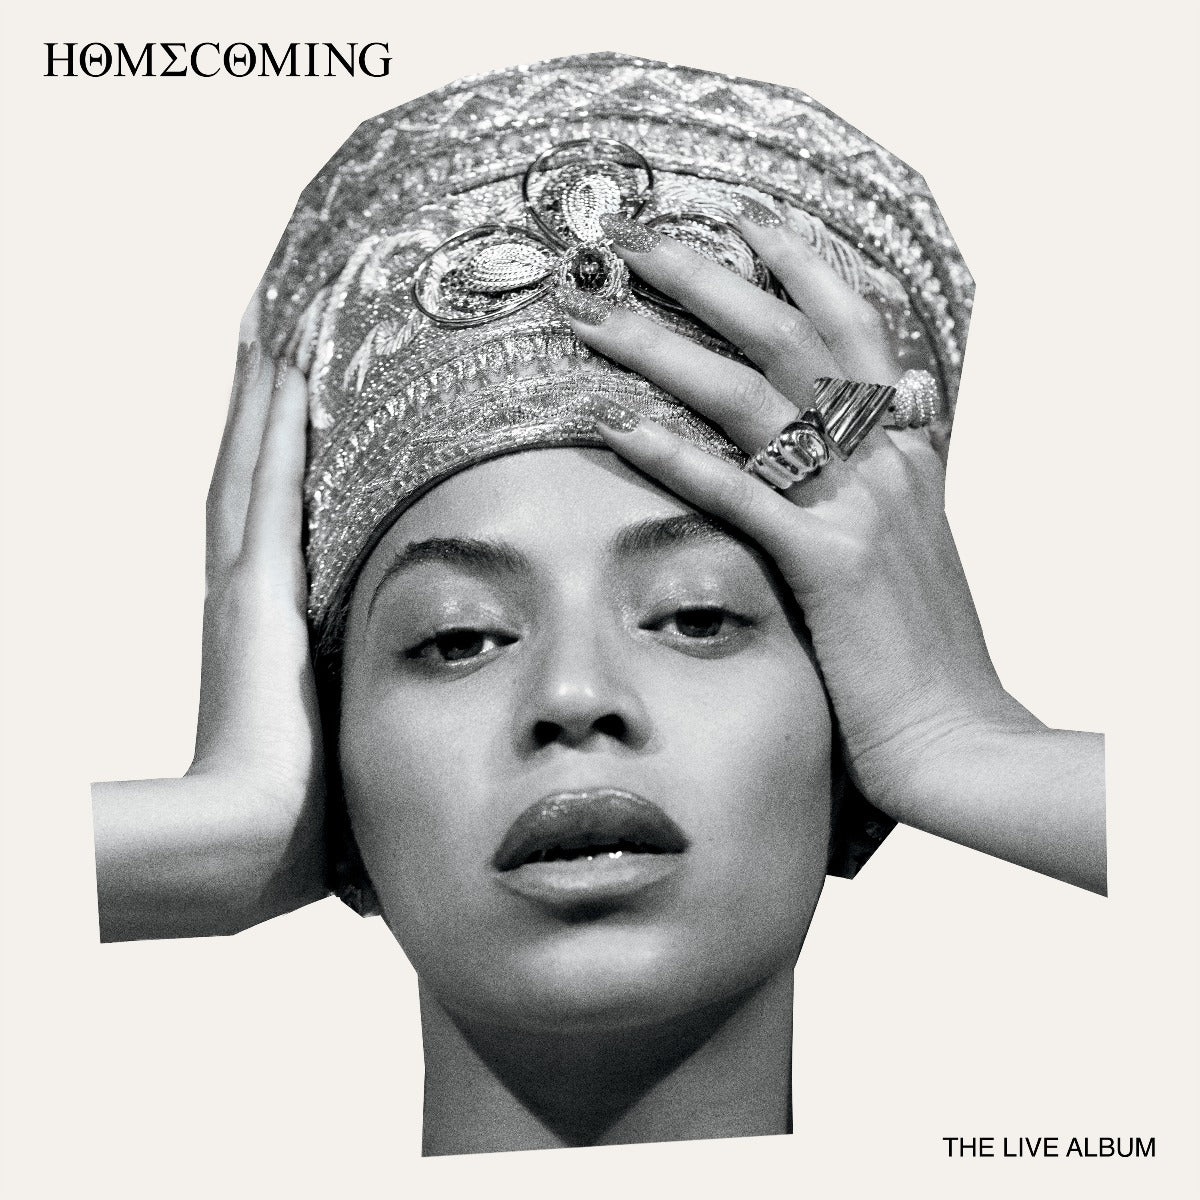 Beyoncé - HOMECOMING: THE LIVE ALBUM (4 LPs, in a slipcase jacket, with a 52 page insert booklet) [Vinyl]